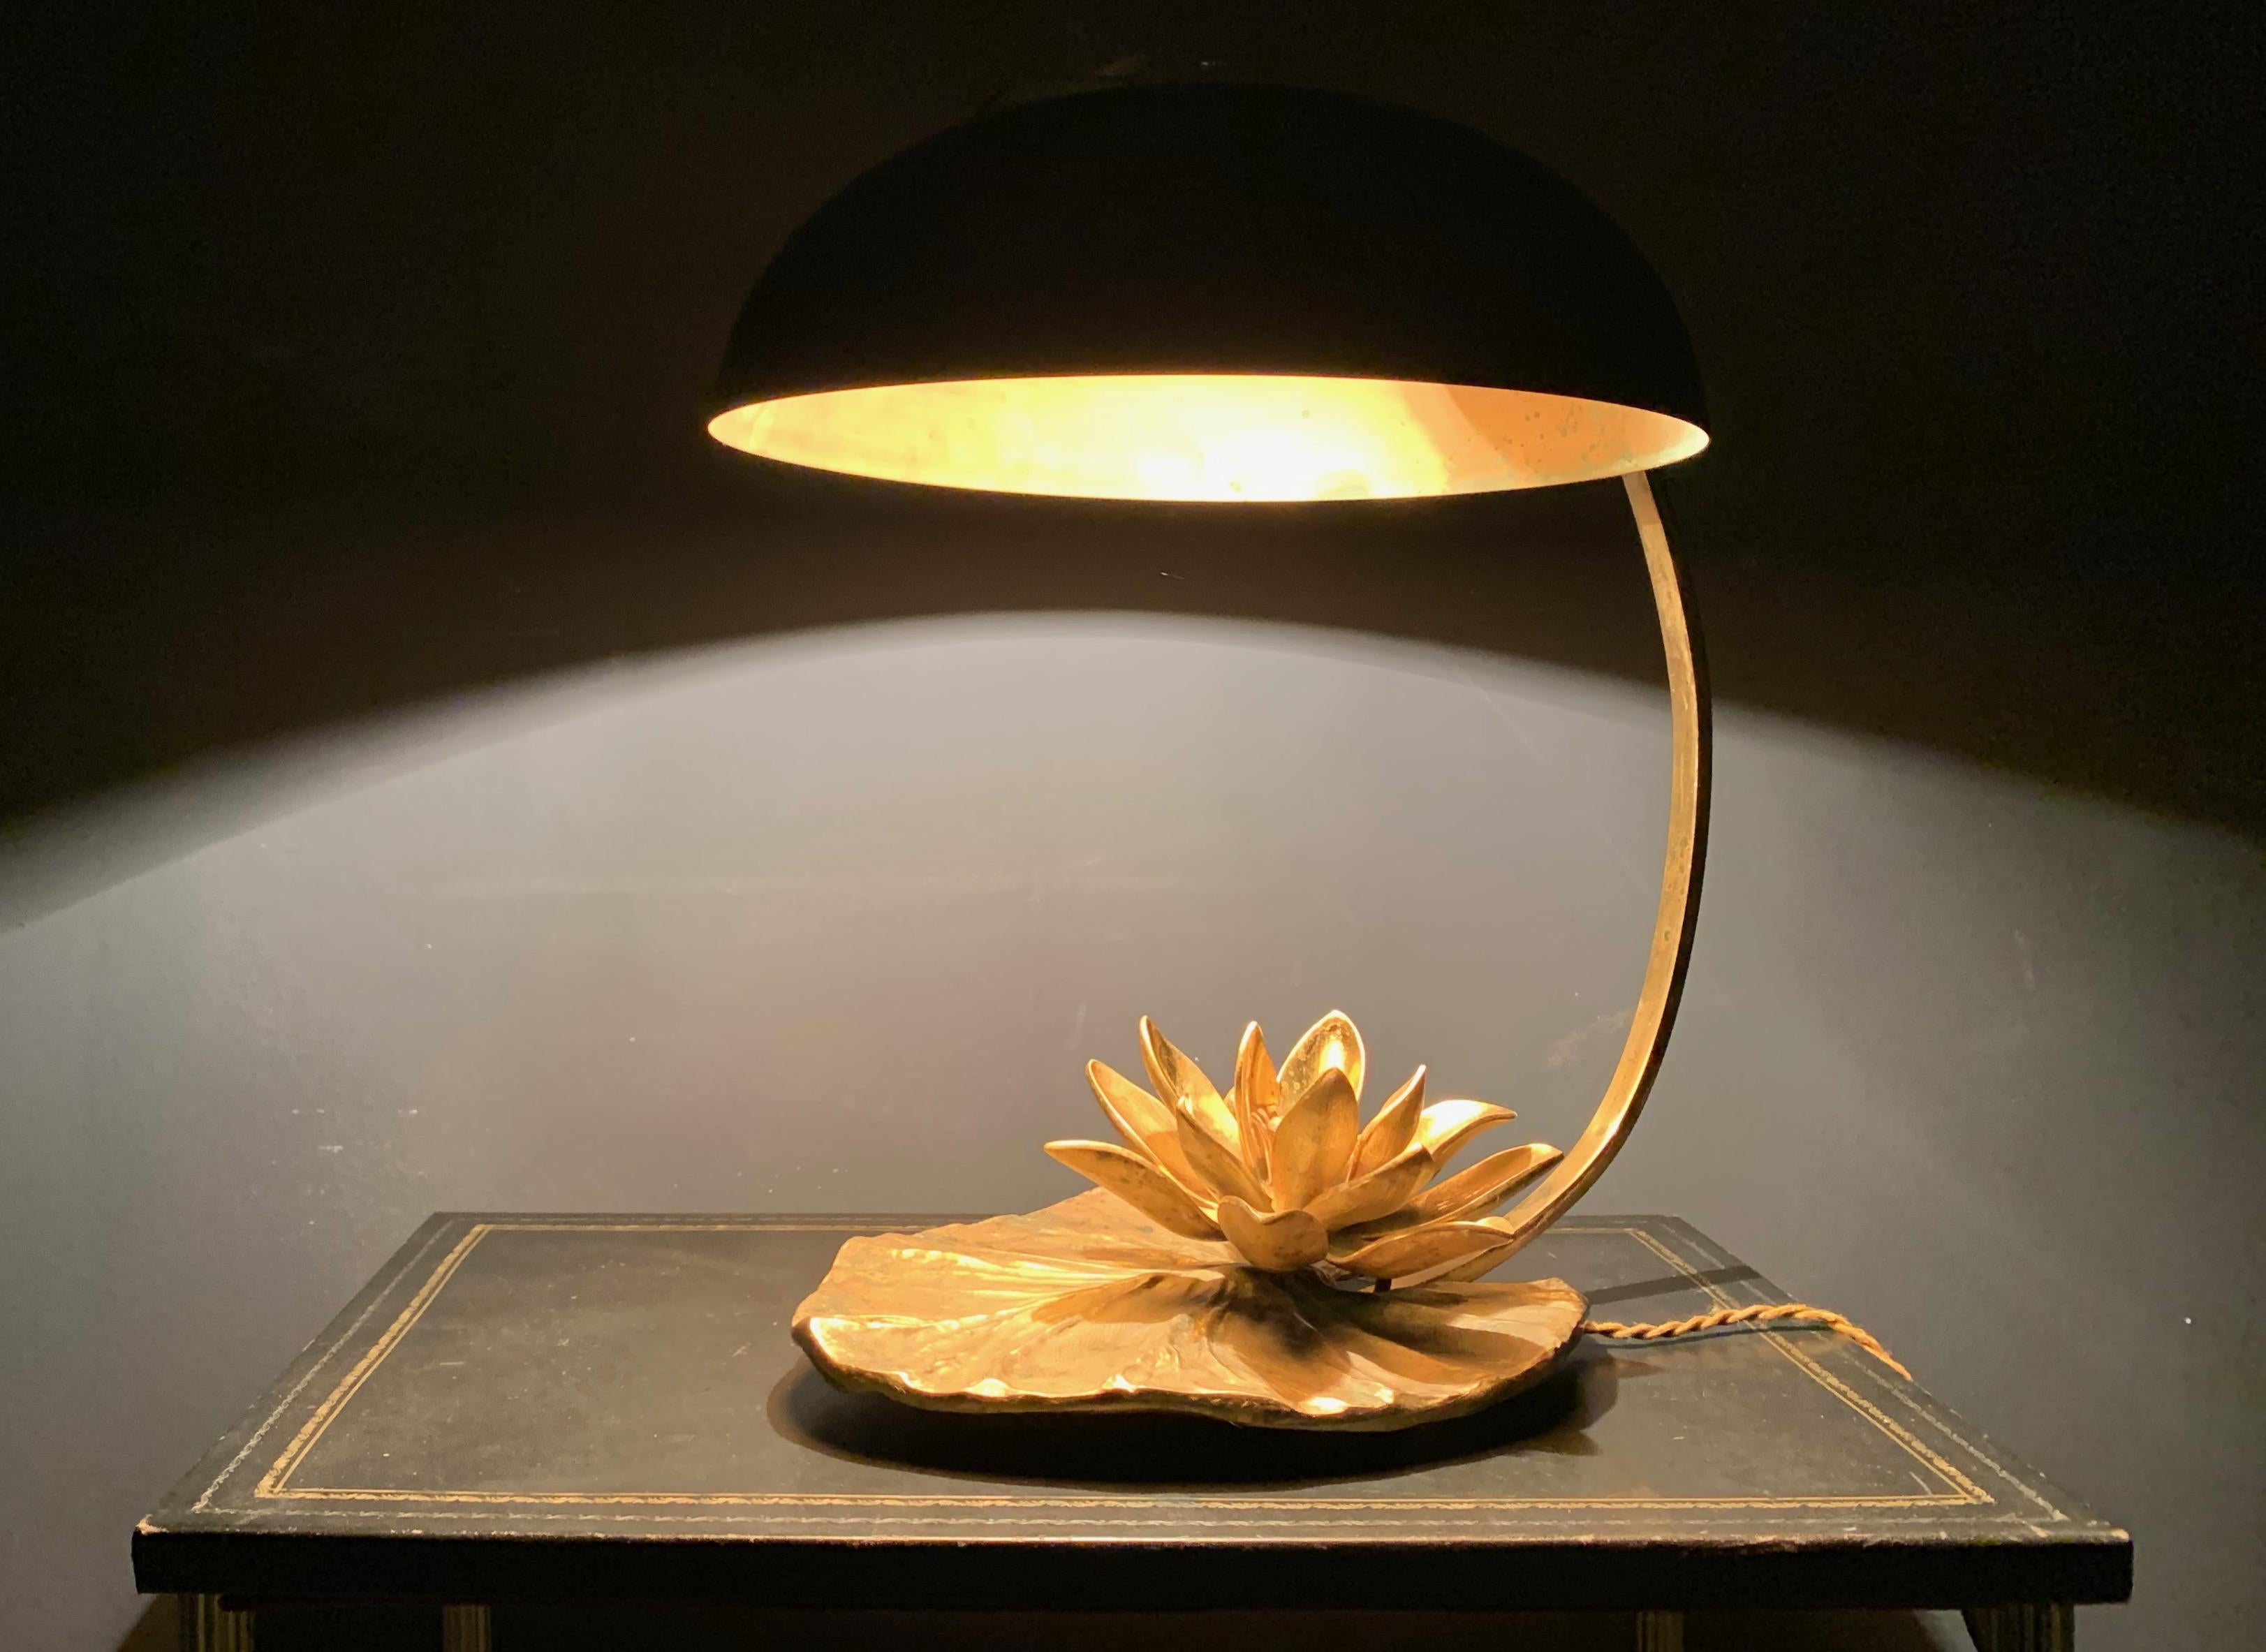 Amazing Water Lily / Nenuphar Table Lamp with Crazy Patina For Sale 2